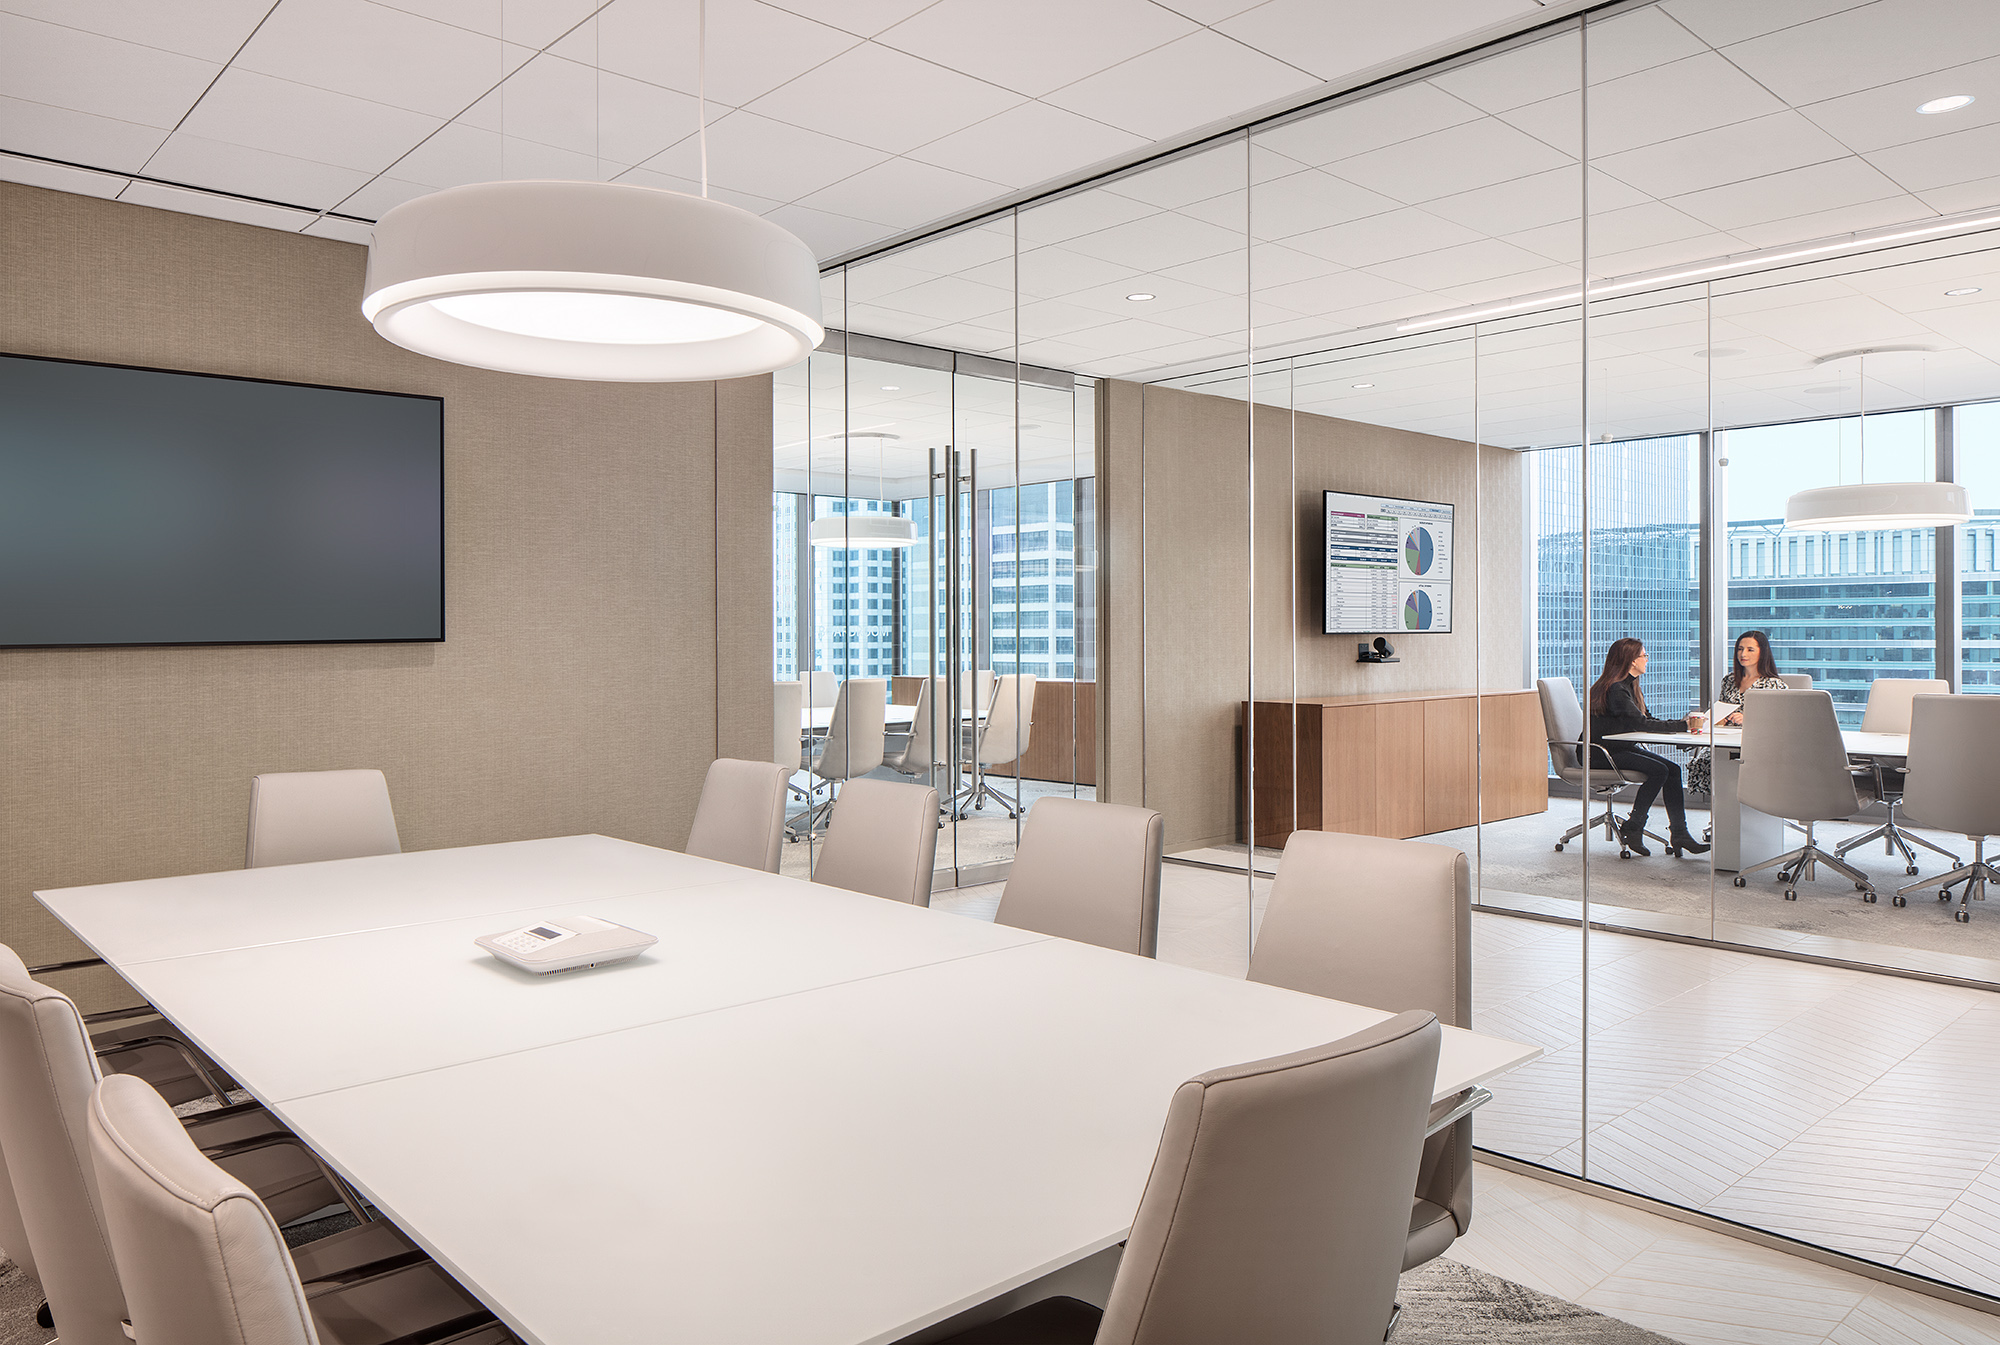 Suite of meeting rooms at SCB's Fortune 500 Global Asset Manager. Interior Design. Workplace.